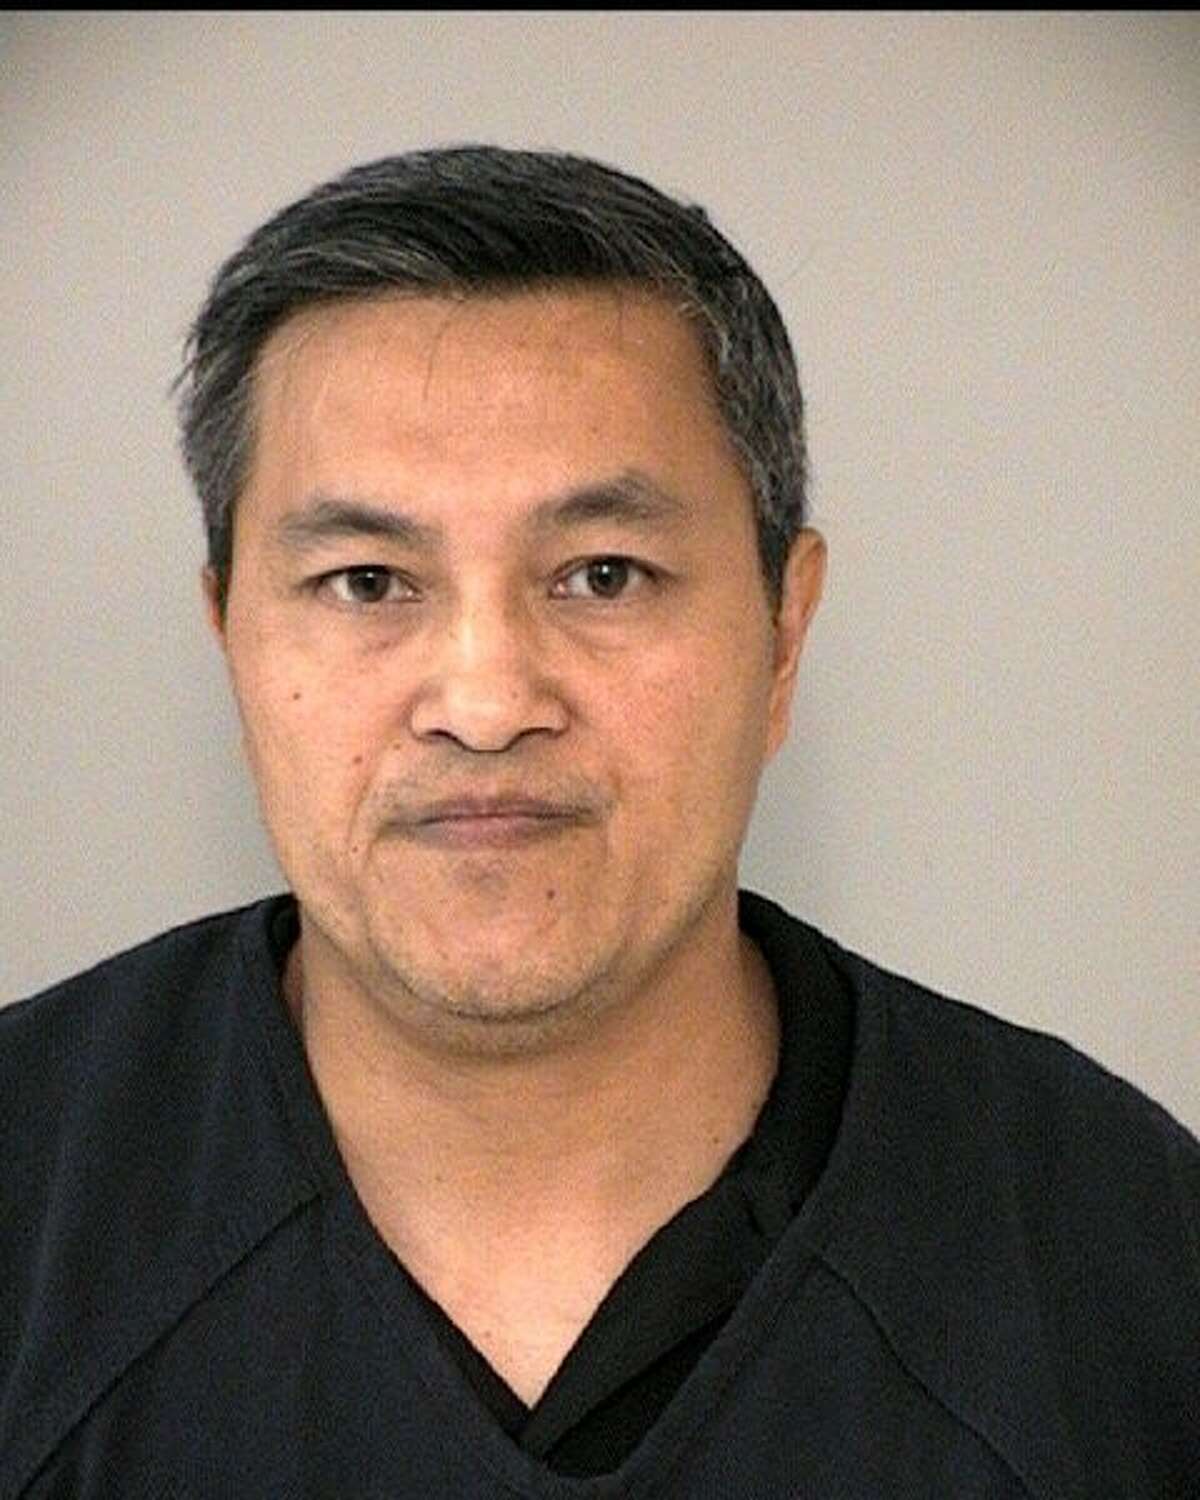 Danny Le, a 22-year veteran of the Houston Police Department, was arrested for allegedly trying to solicit sex during a sting operation in Fort Bend County, according to court records.